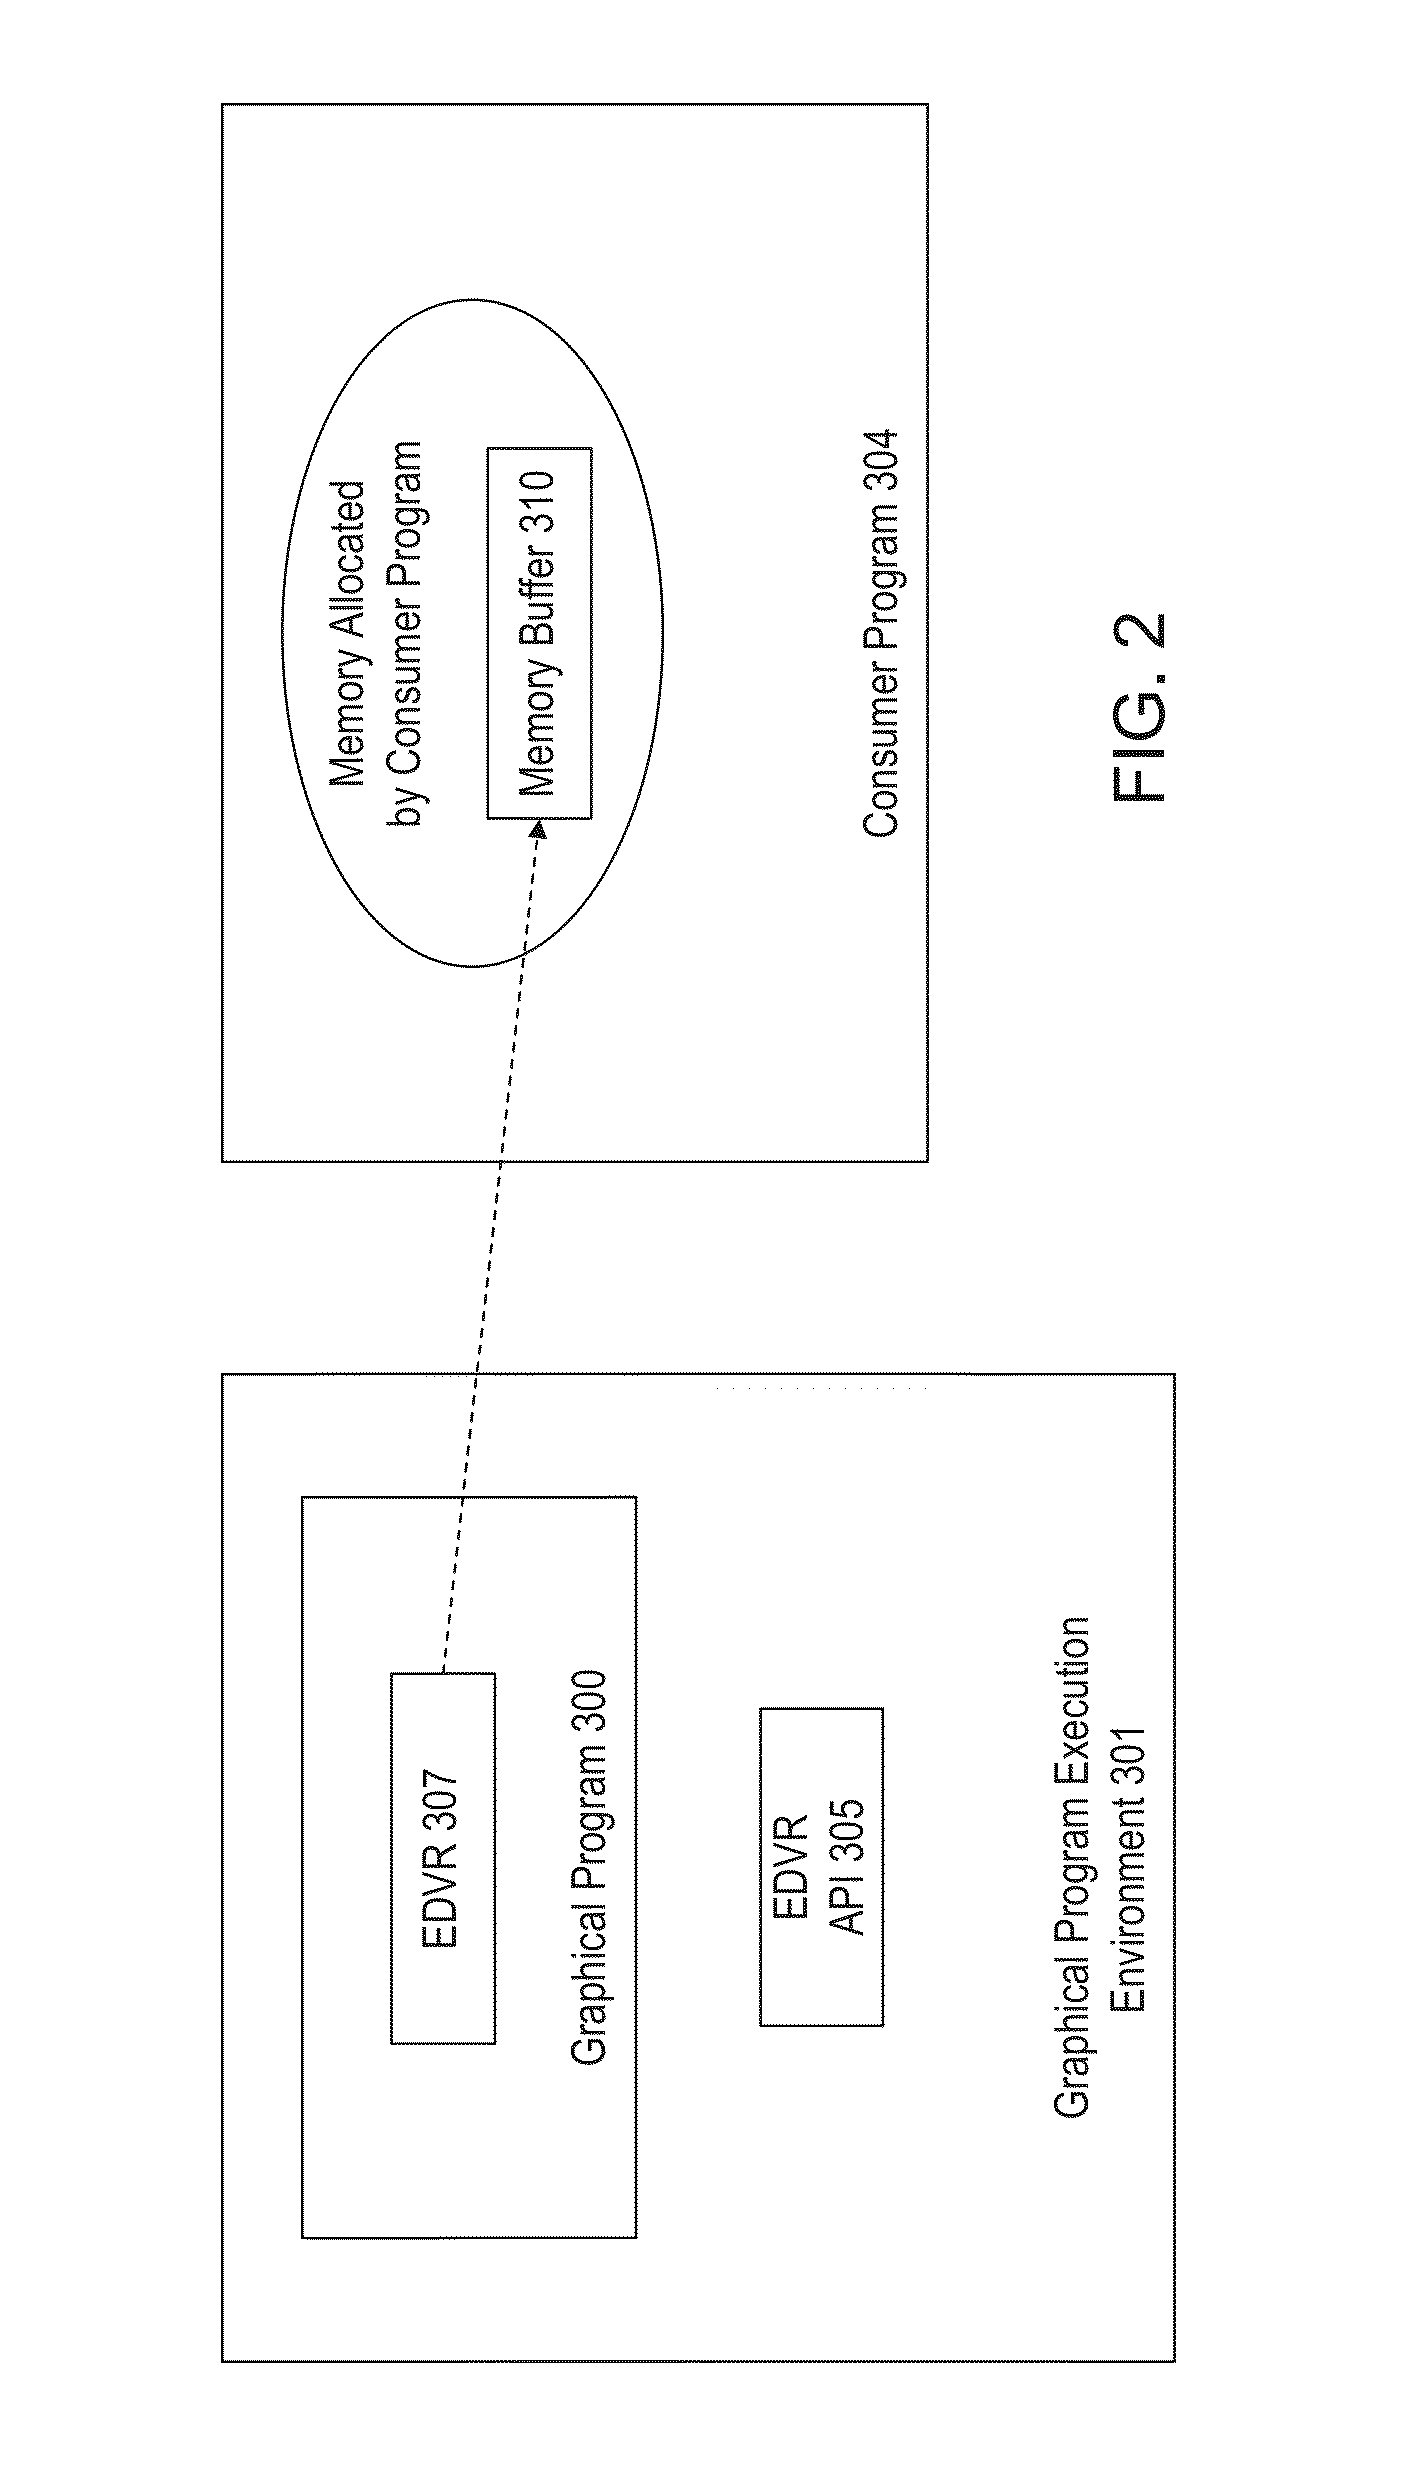 Graphical Programming System enabling Data Sharing from a Producer to a Consumer via a Memory Buffer